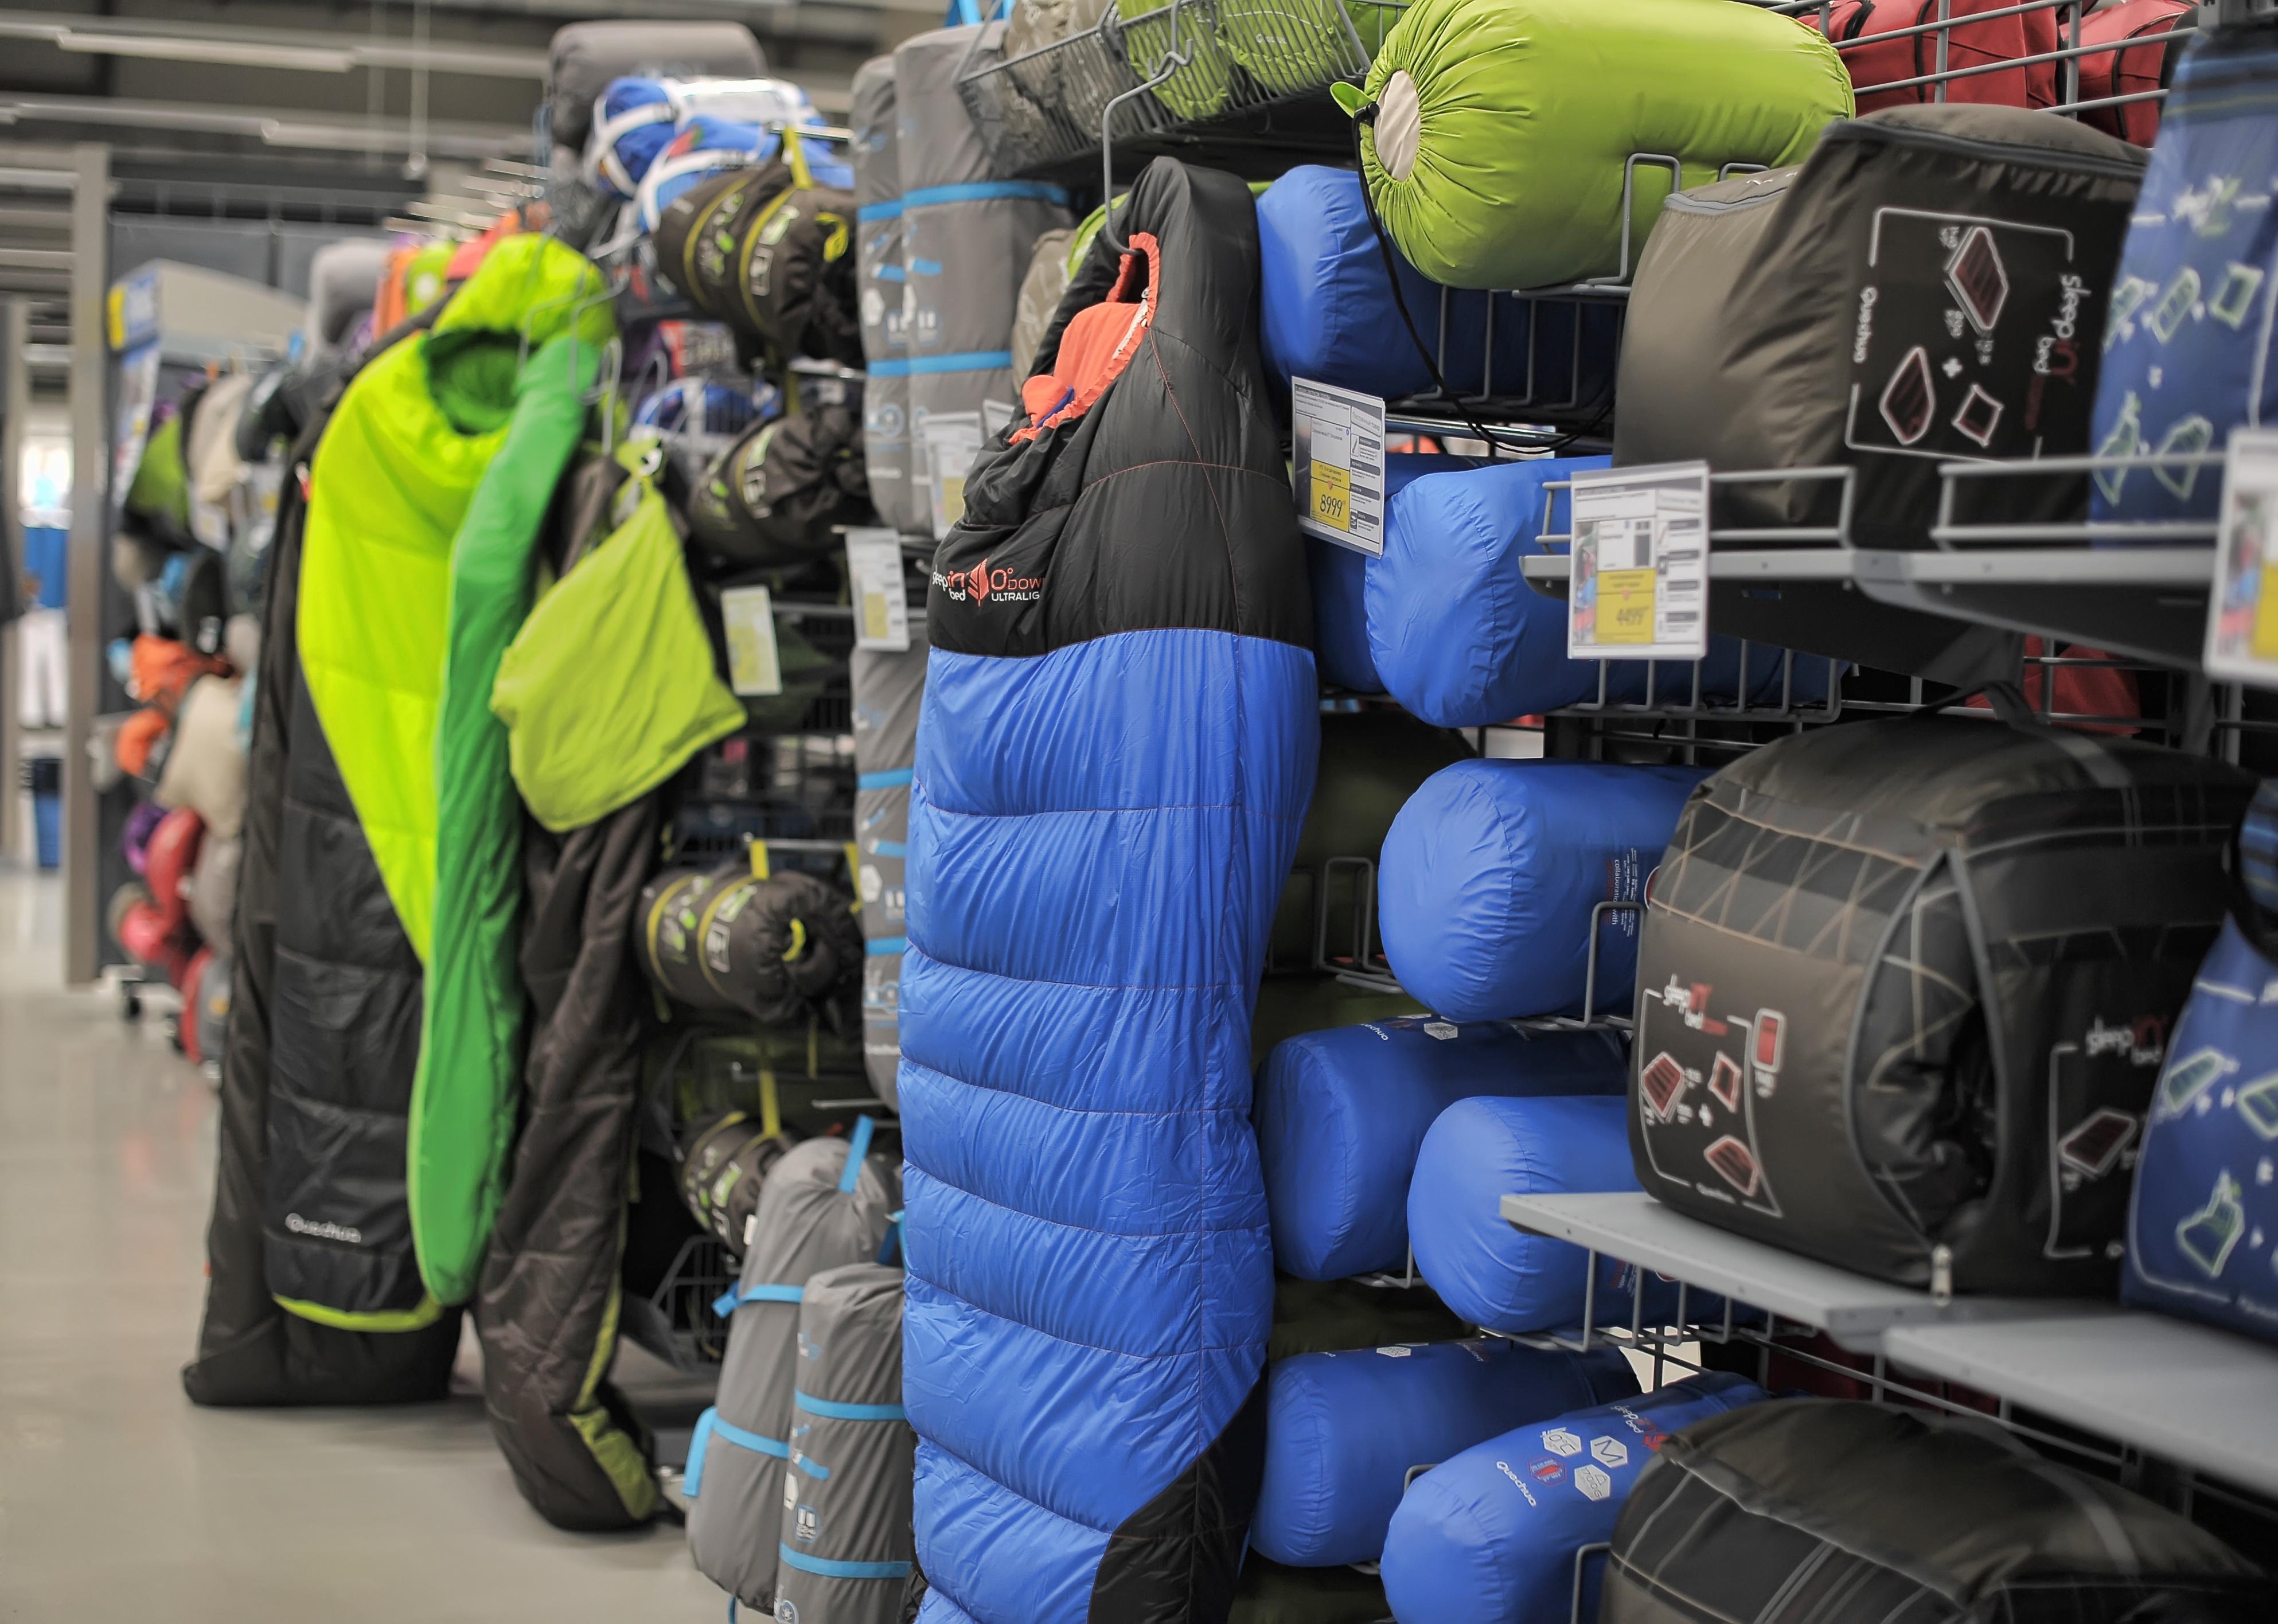 Winter sleeping bags in a sports store